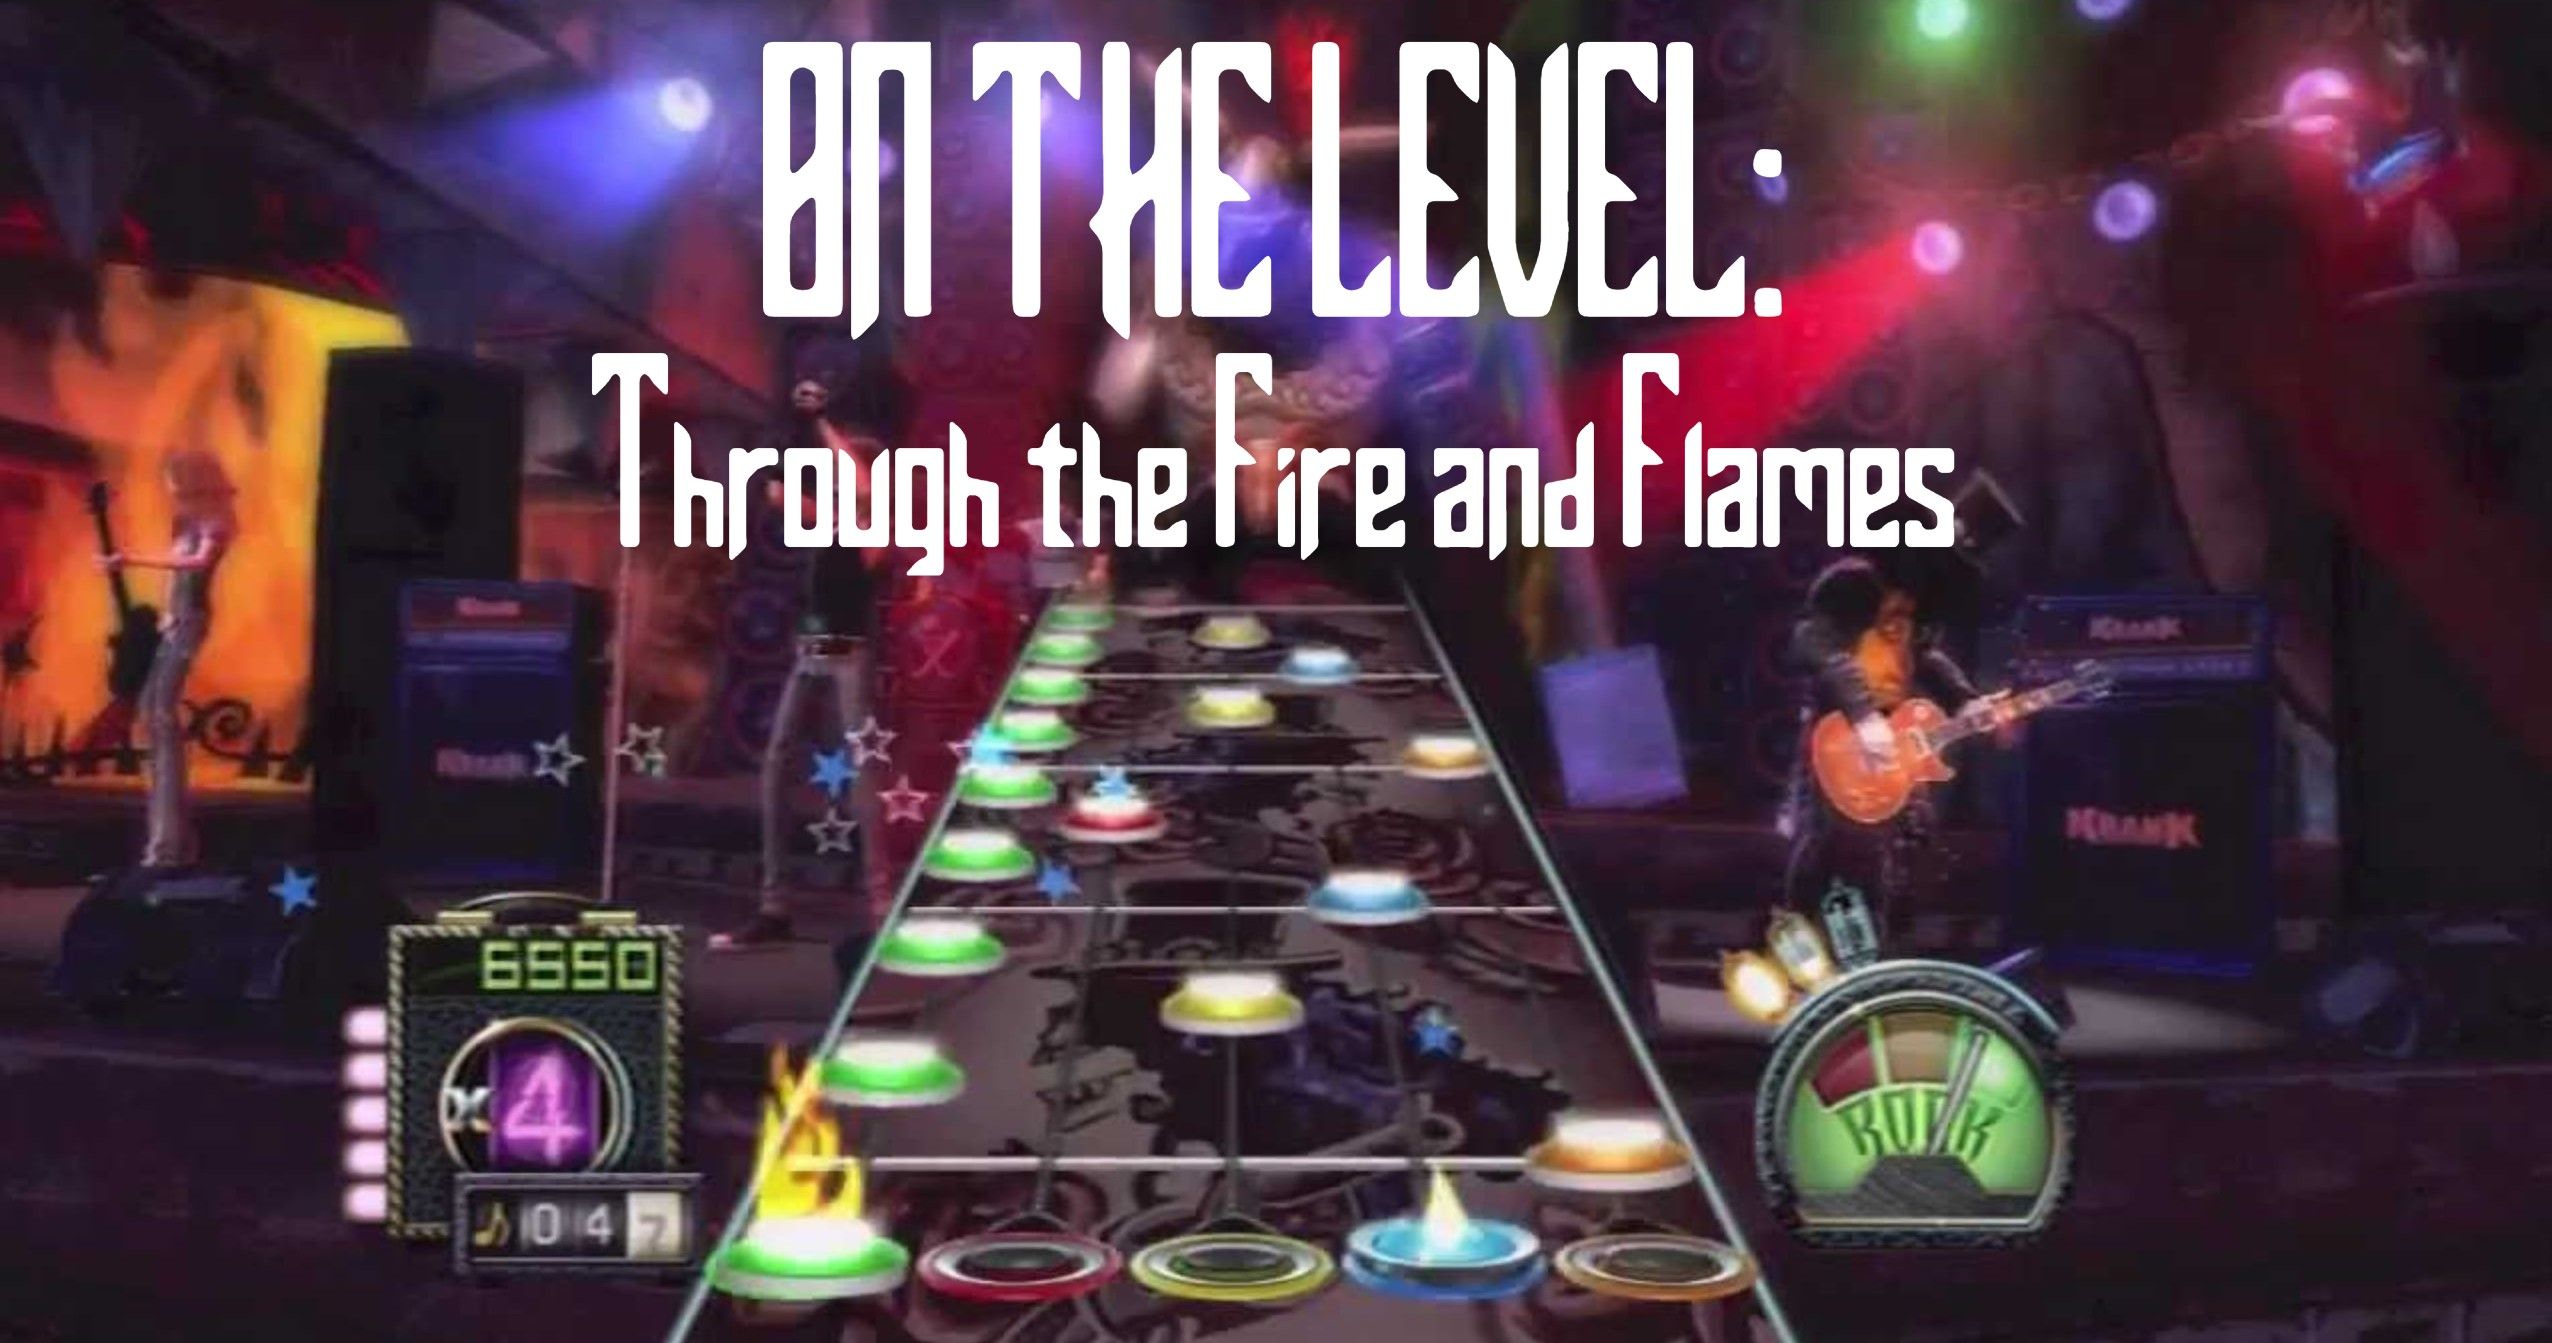 Through The Fire And Flames 100% Expert Guitar Hero 3 on Make a GIF